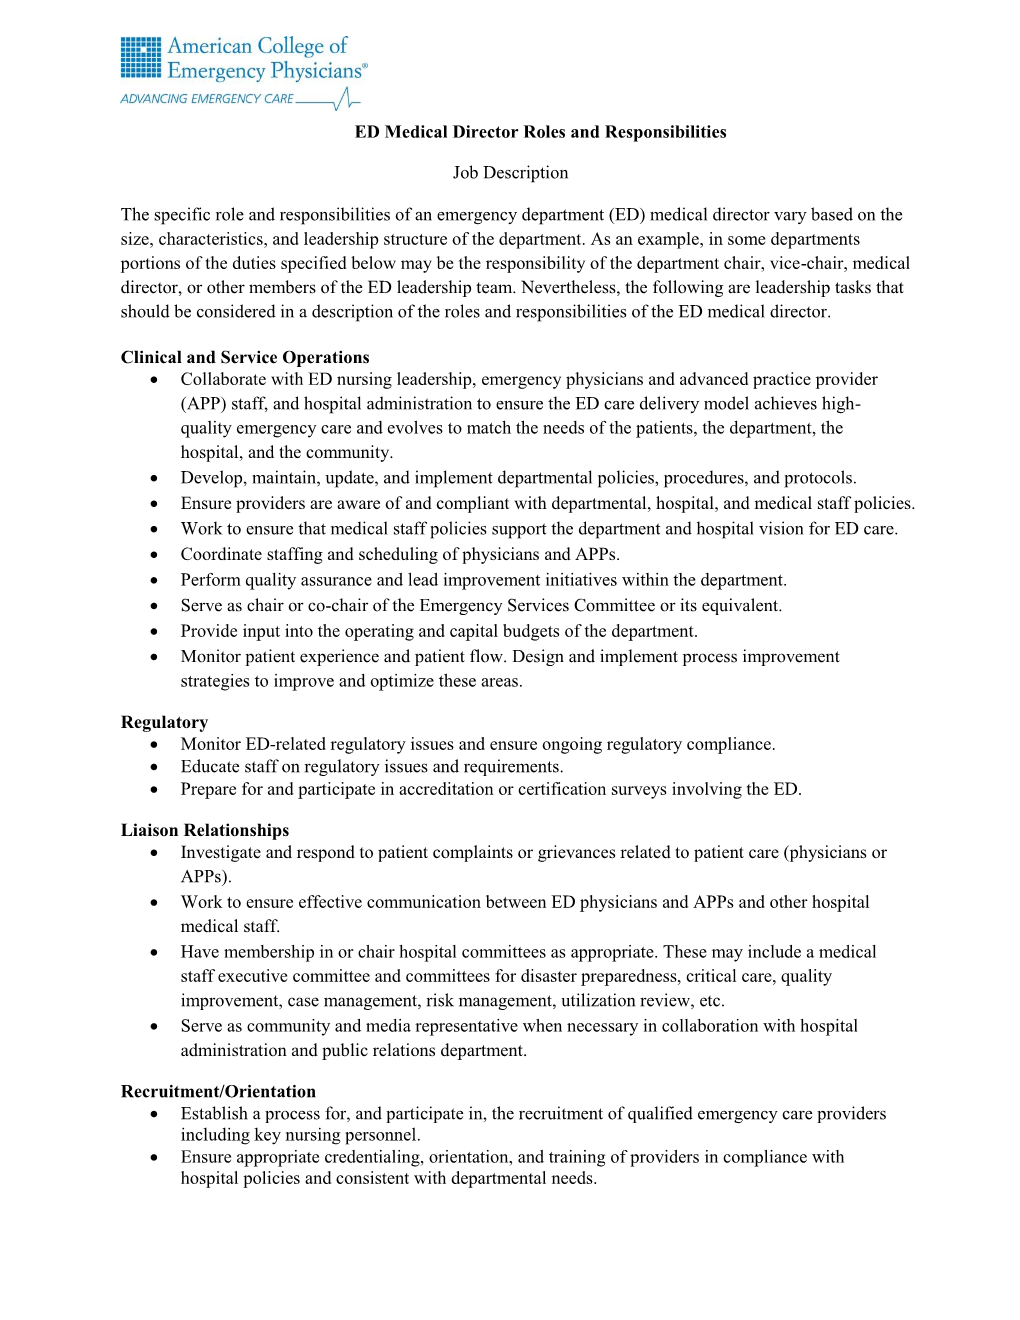 ED Medical Director Roles and Responsibilities Job Description, July 2015 Page 2